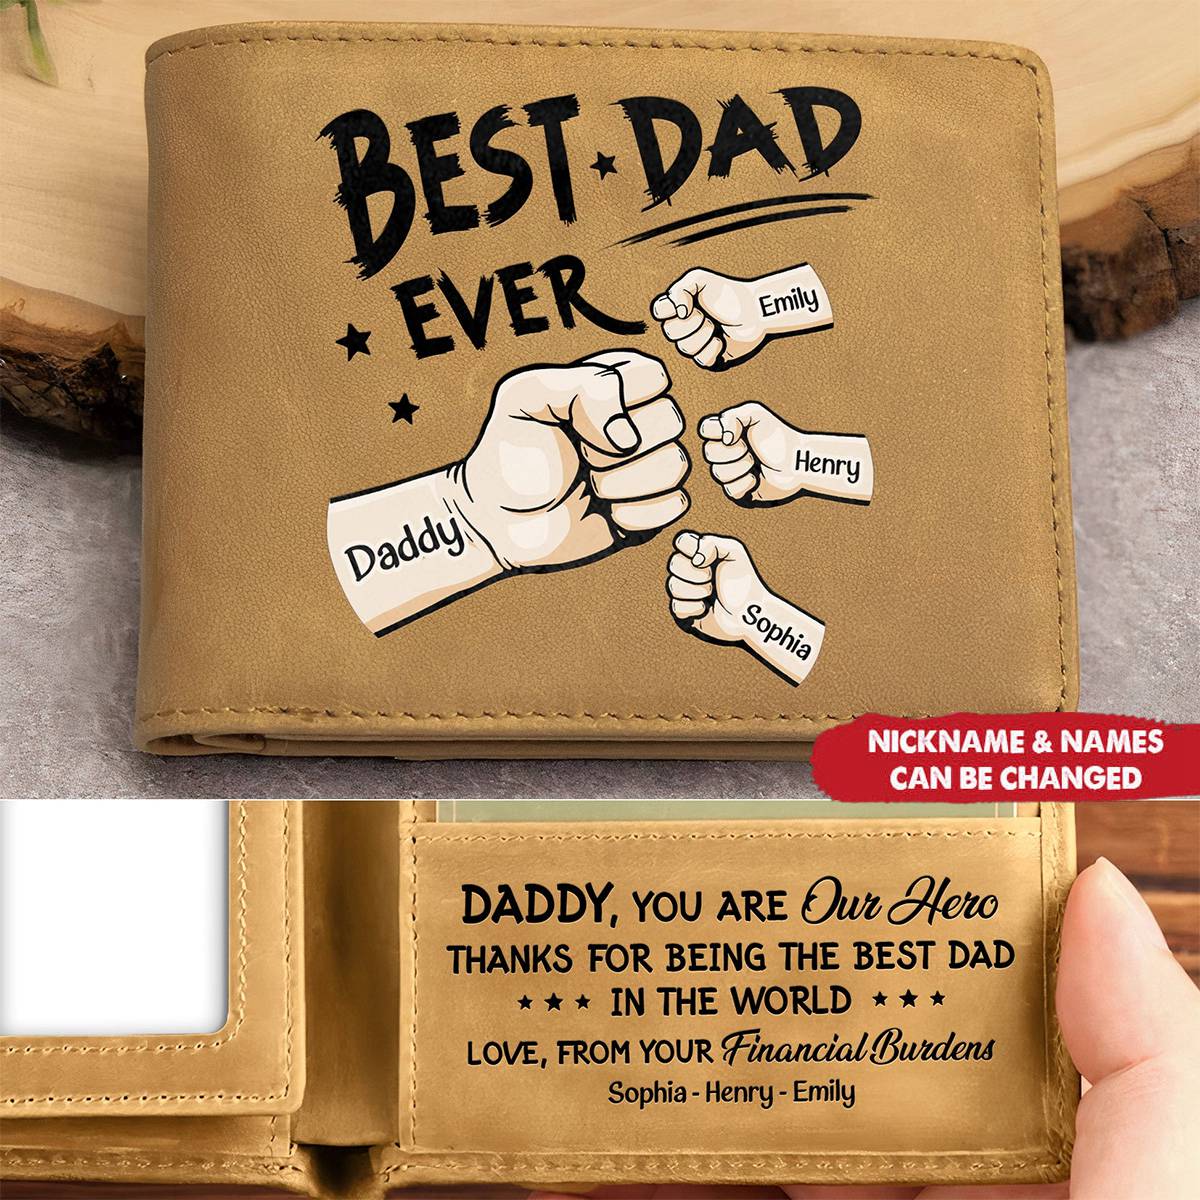 Best Dad Ever - Personalized Leather Wallet